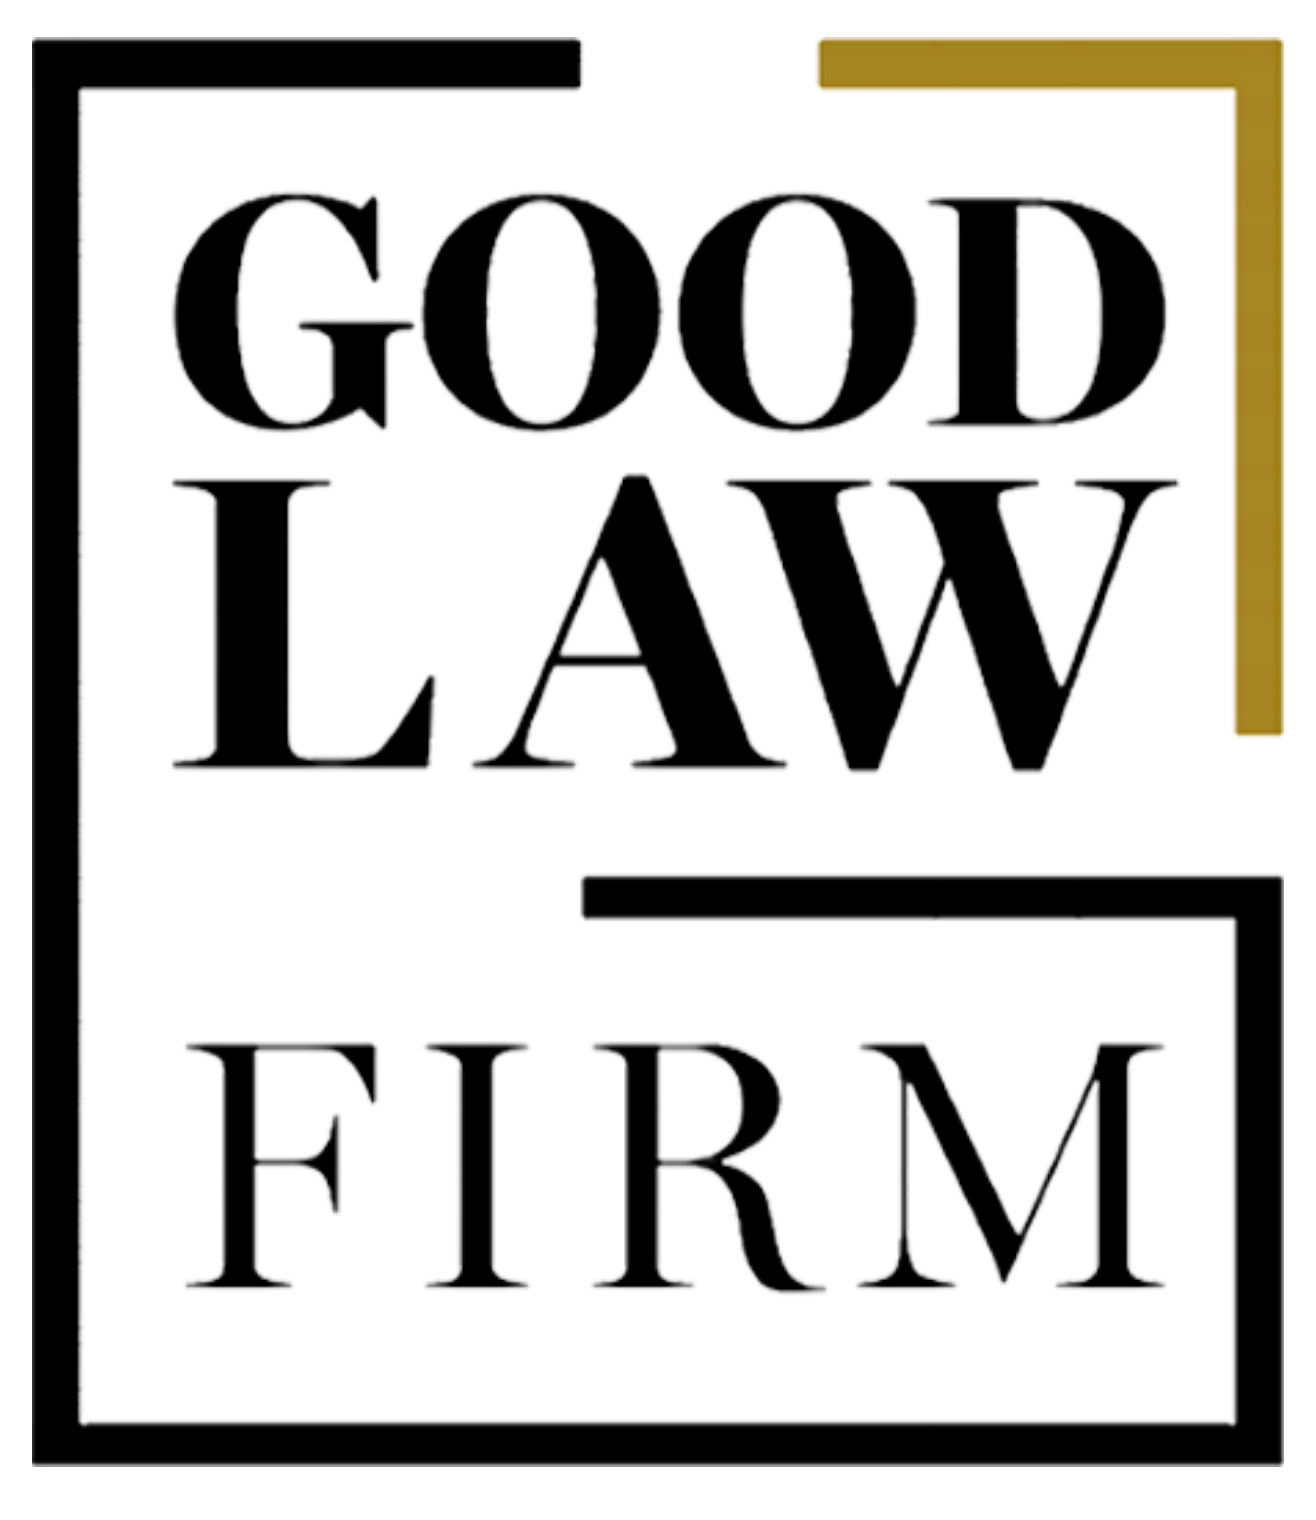 Our partner GOOD LAW FIRM's logo